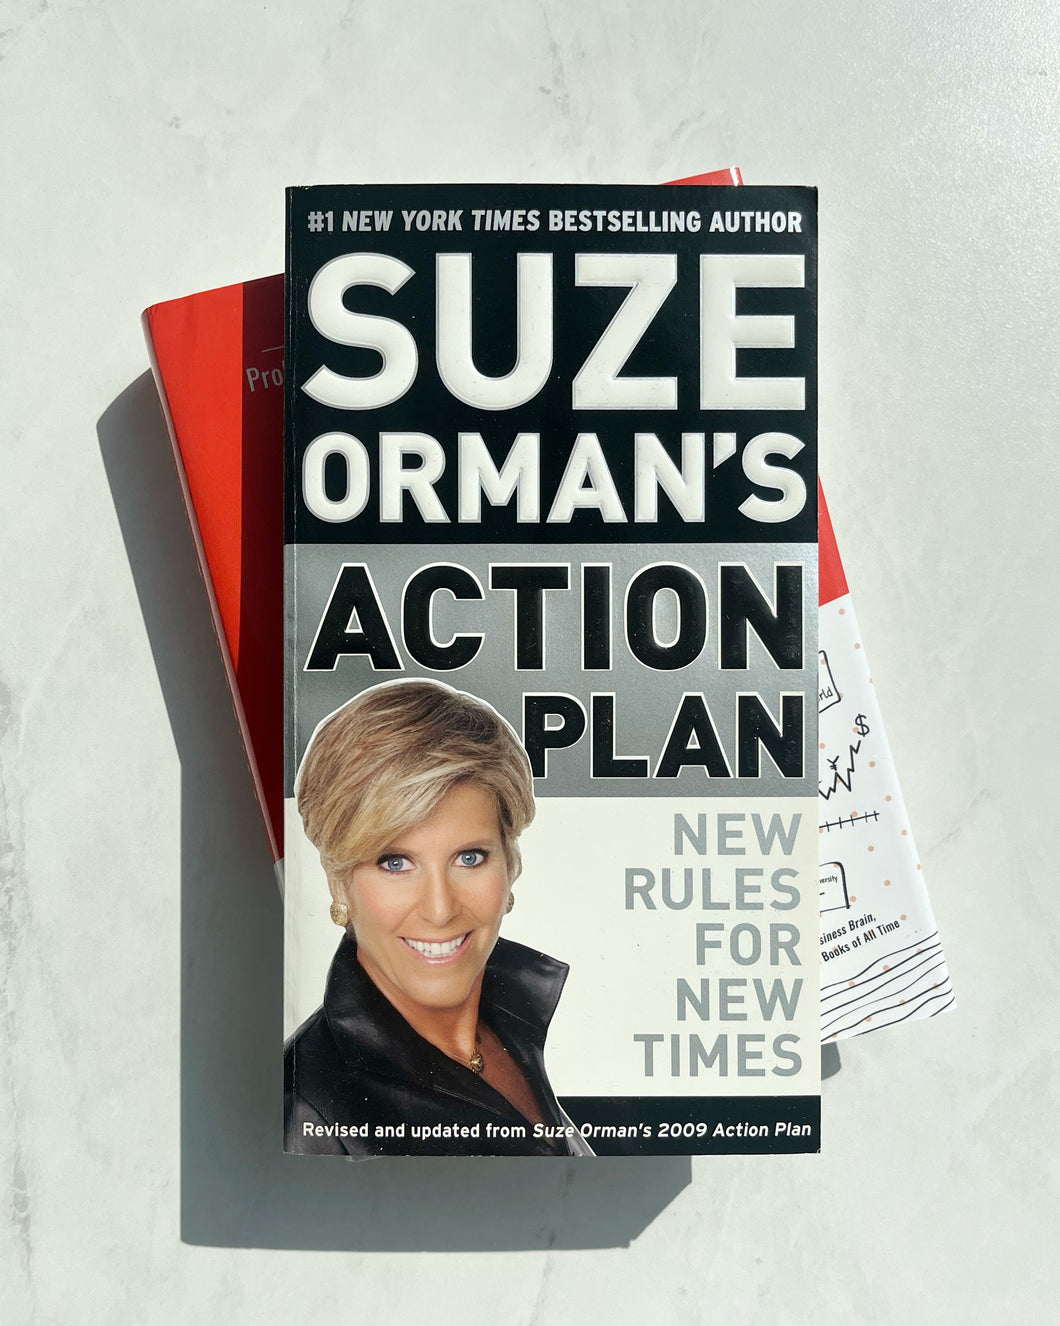 Action Plan by Suze Orman